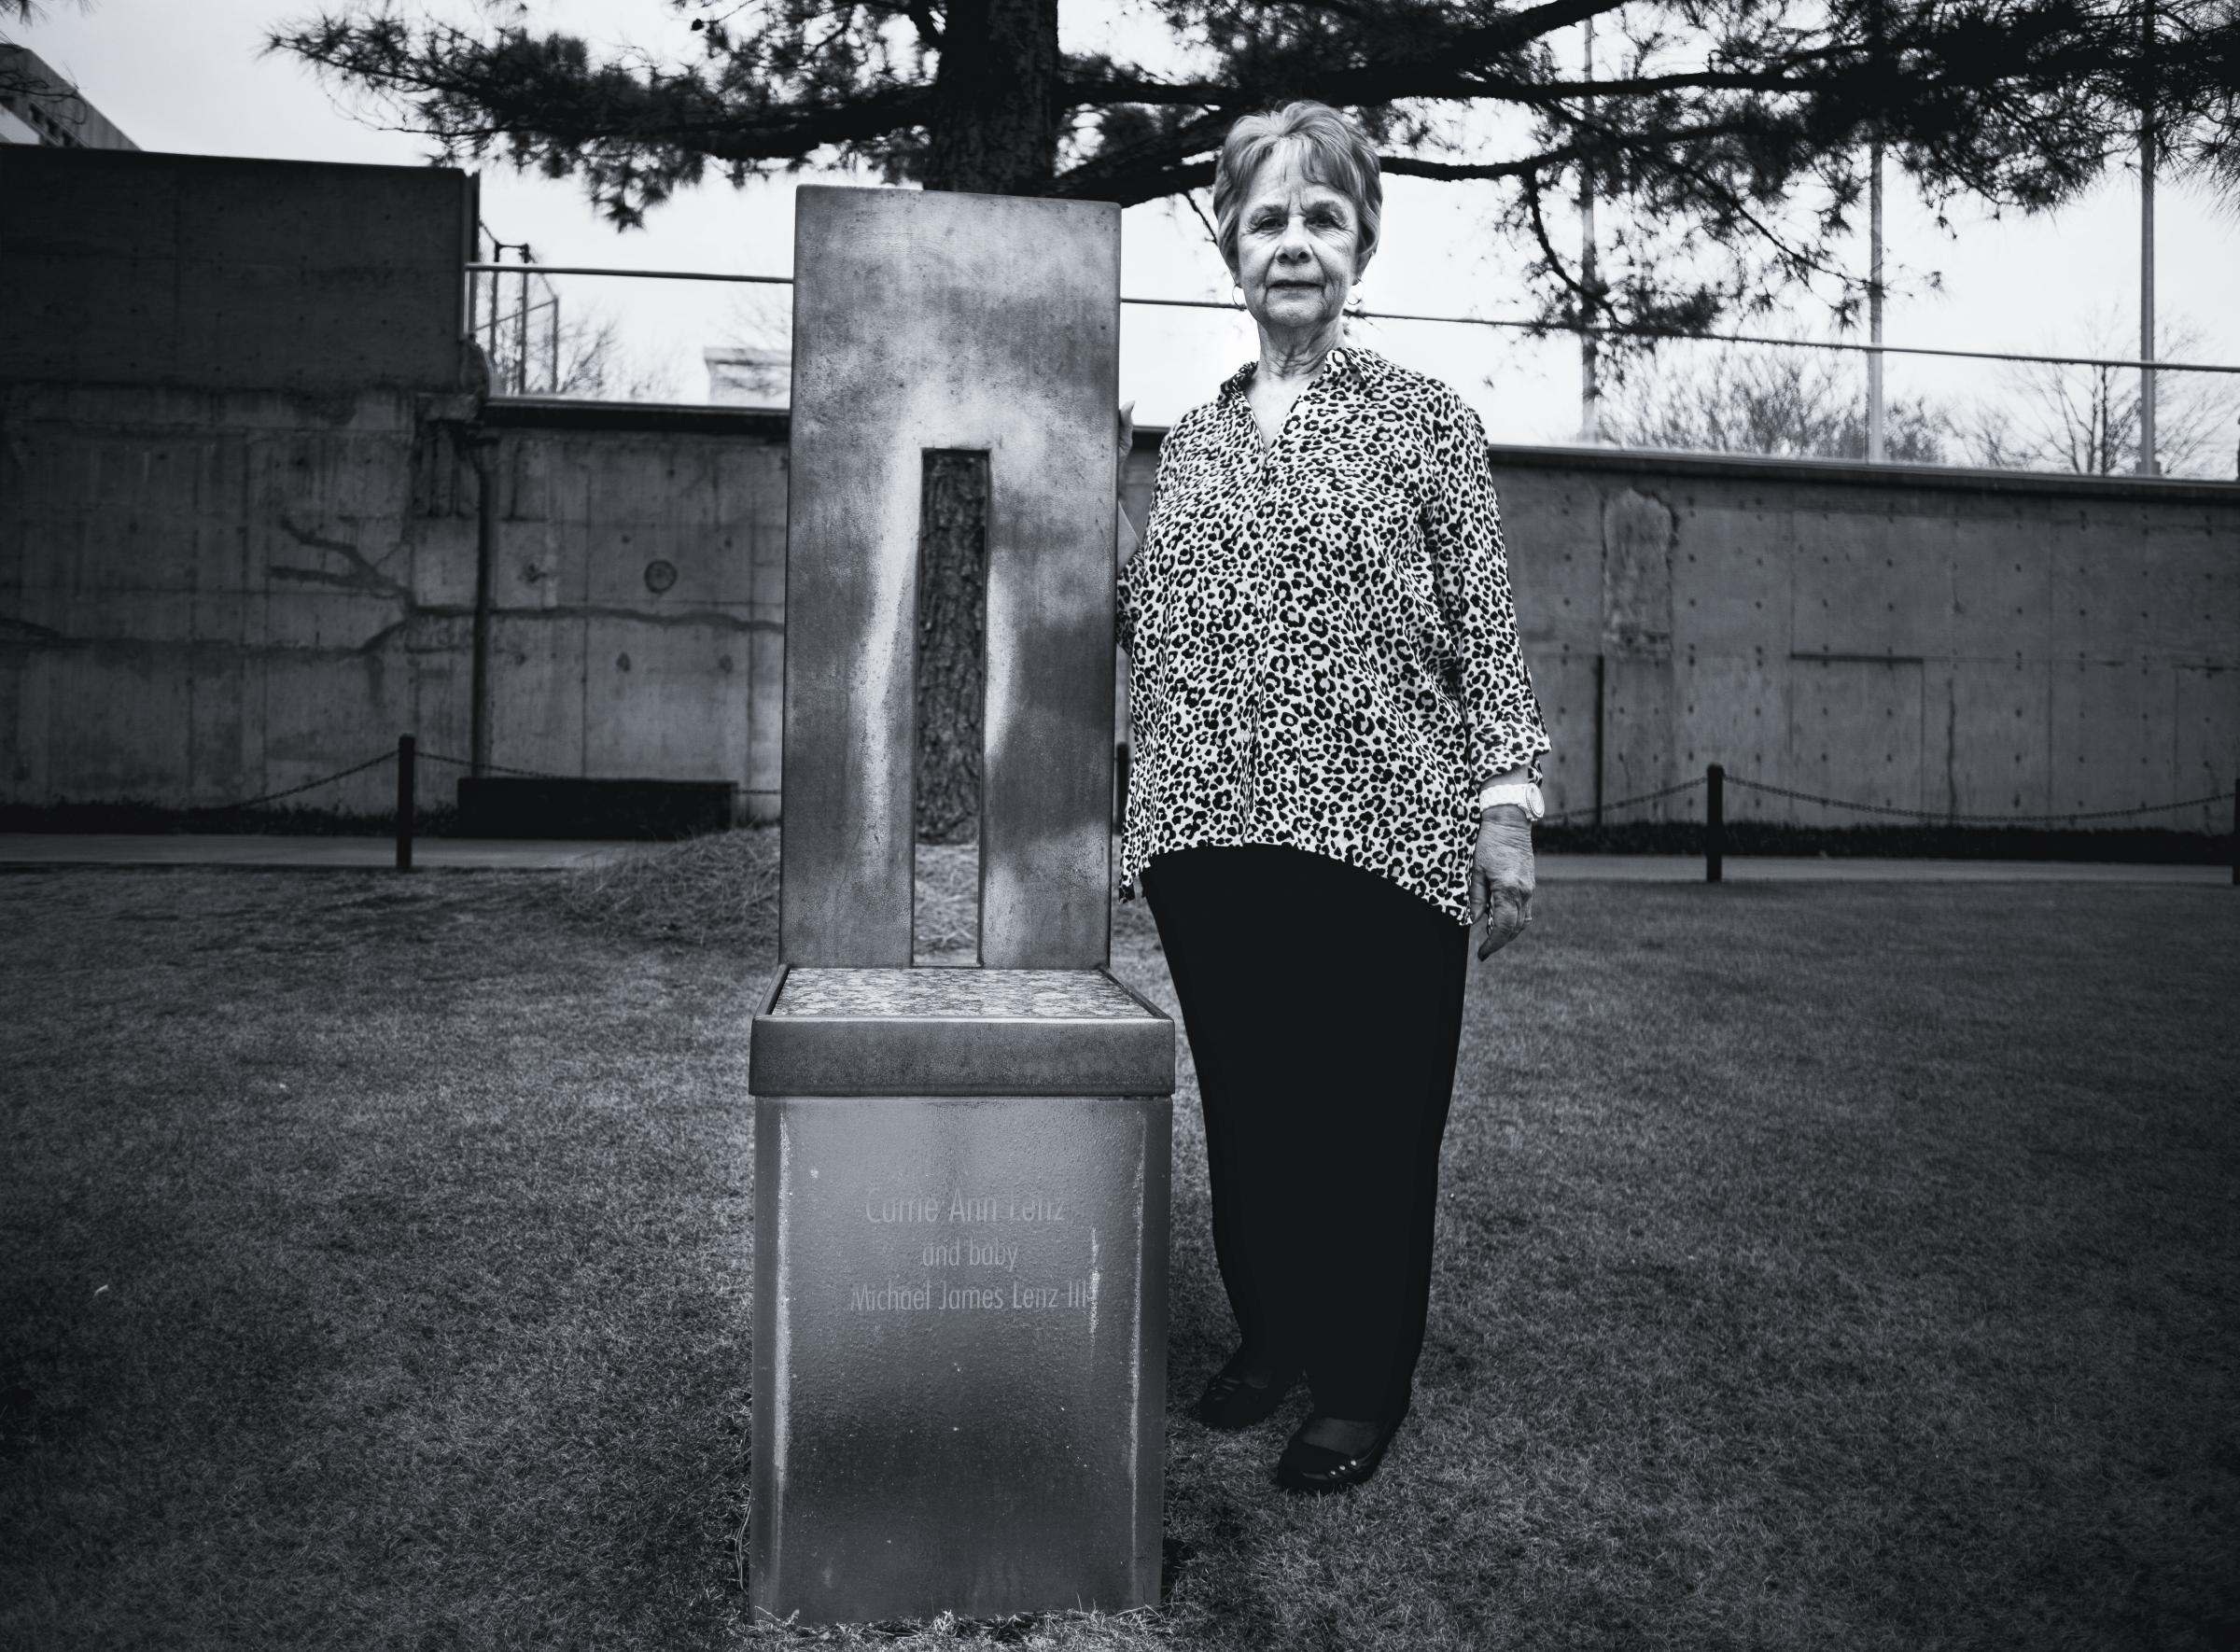  Doris Jones, Oklahoma City bombing : &ldquo;My son-in-law went to identify my daughter&rsquo;s body. She had long brown hair, but when he...